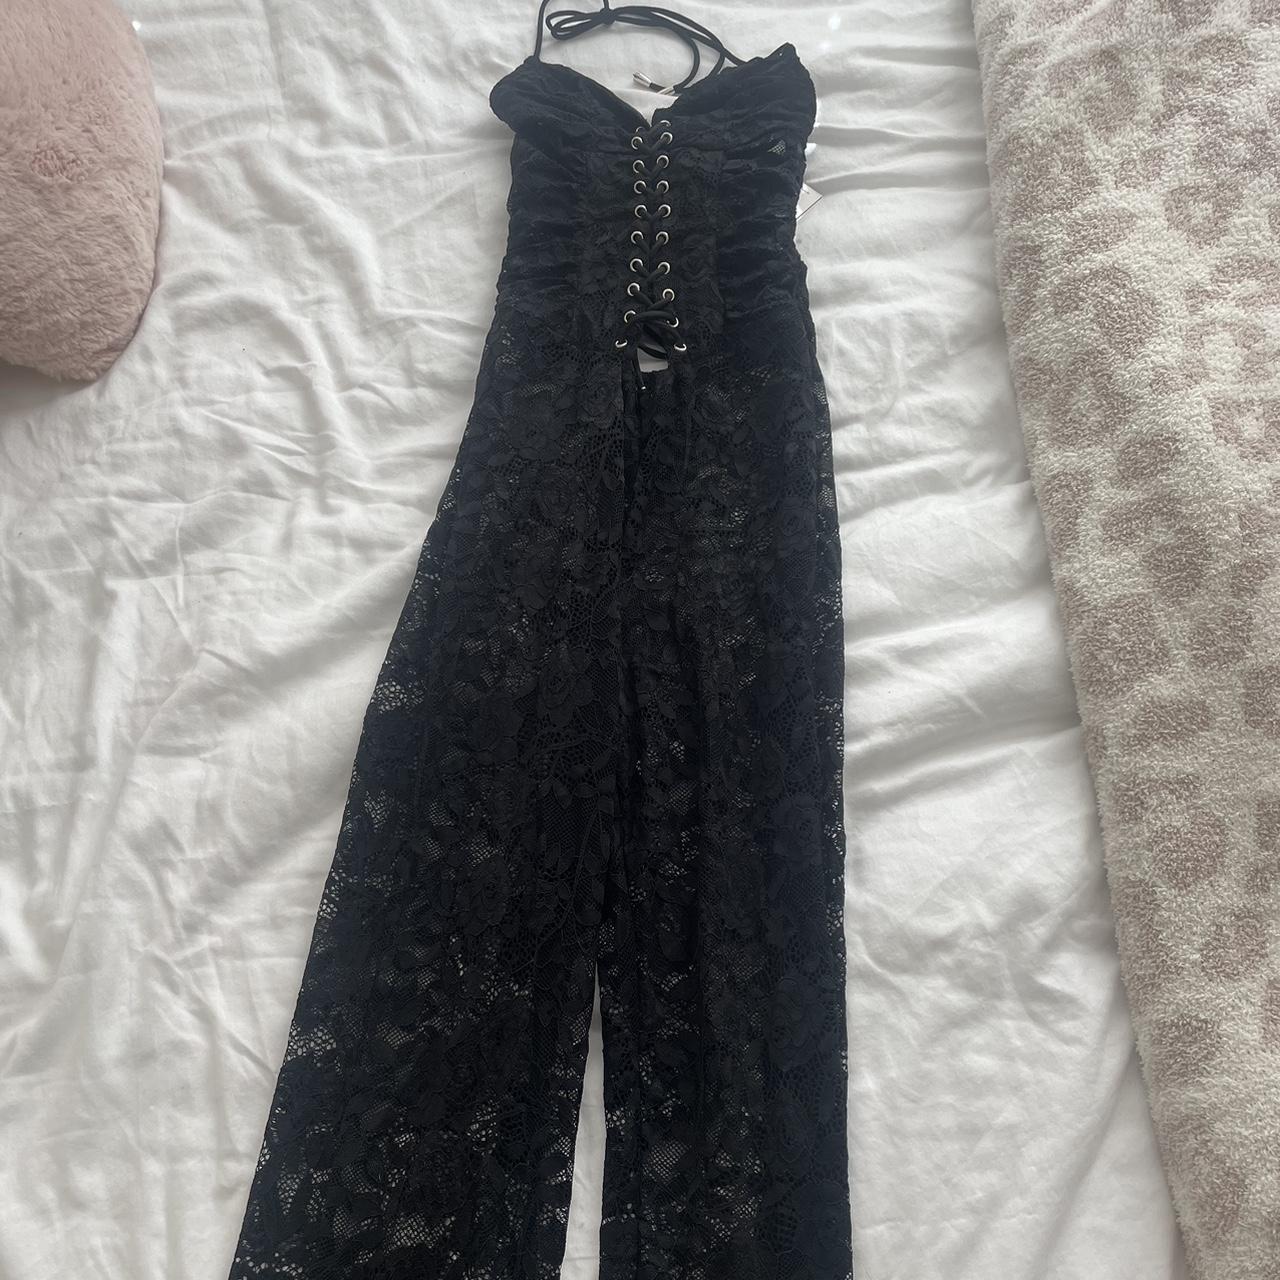 Outcast Remi Jumpsuit in Black - Never Worn, New - Depop